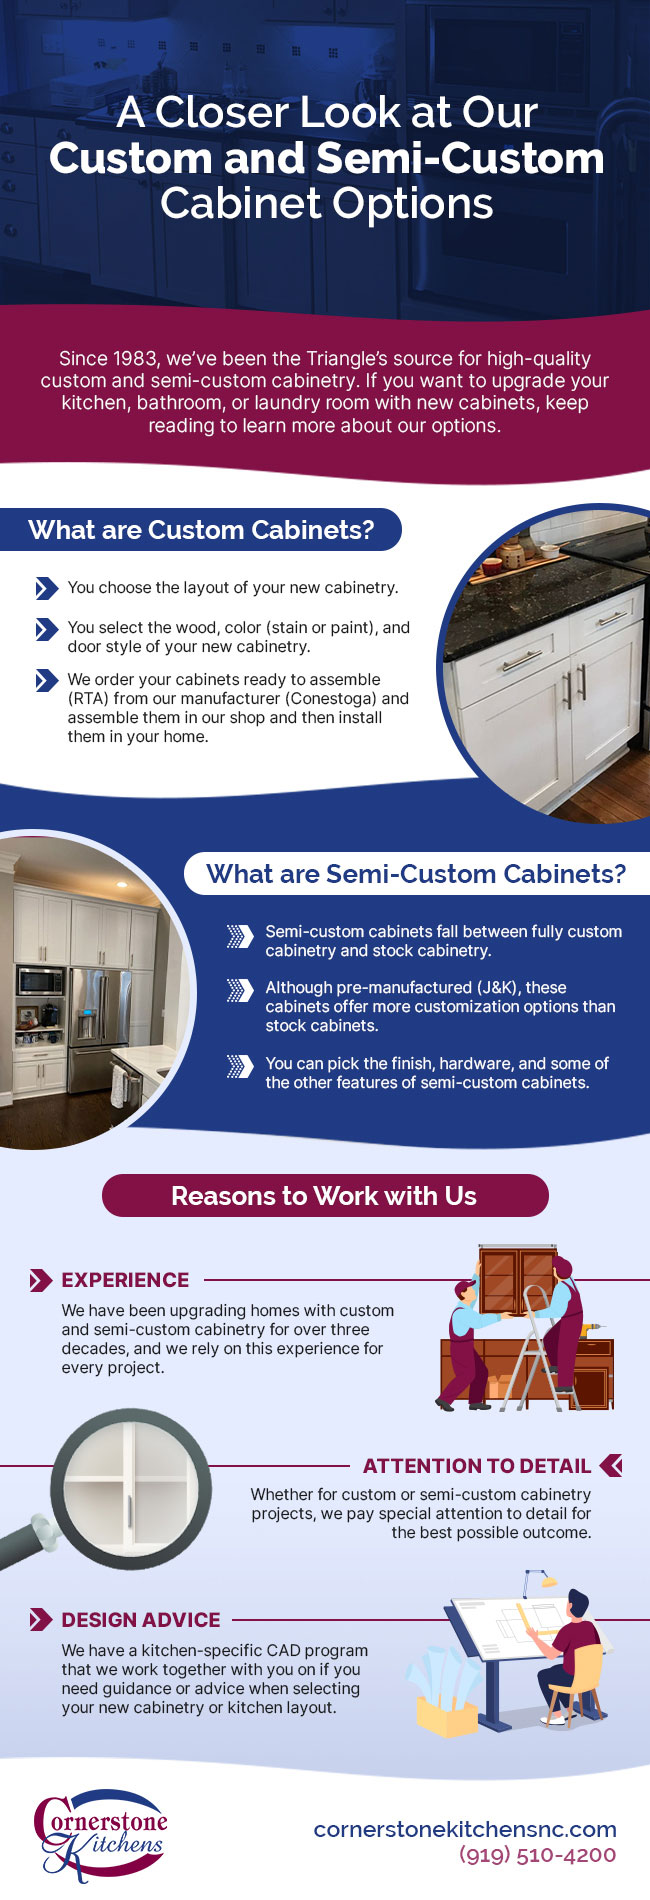 A Closer Look at Our Custom and Semi-Custom Cabinet Options